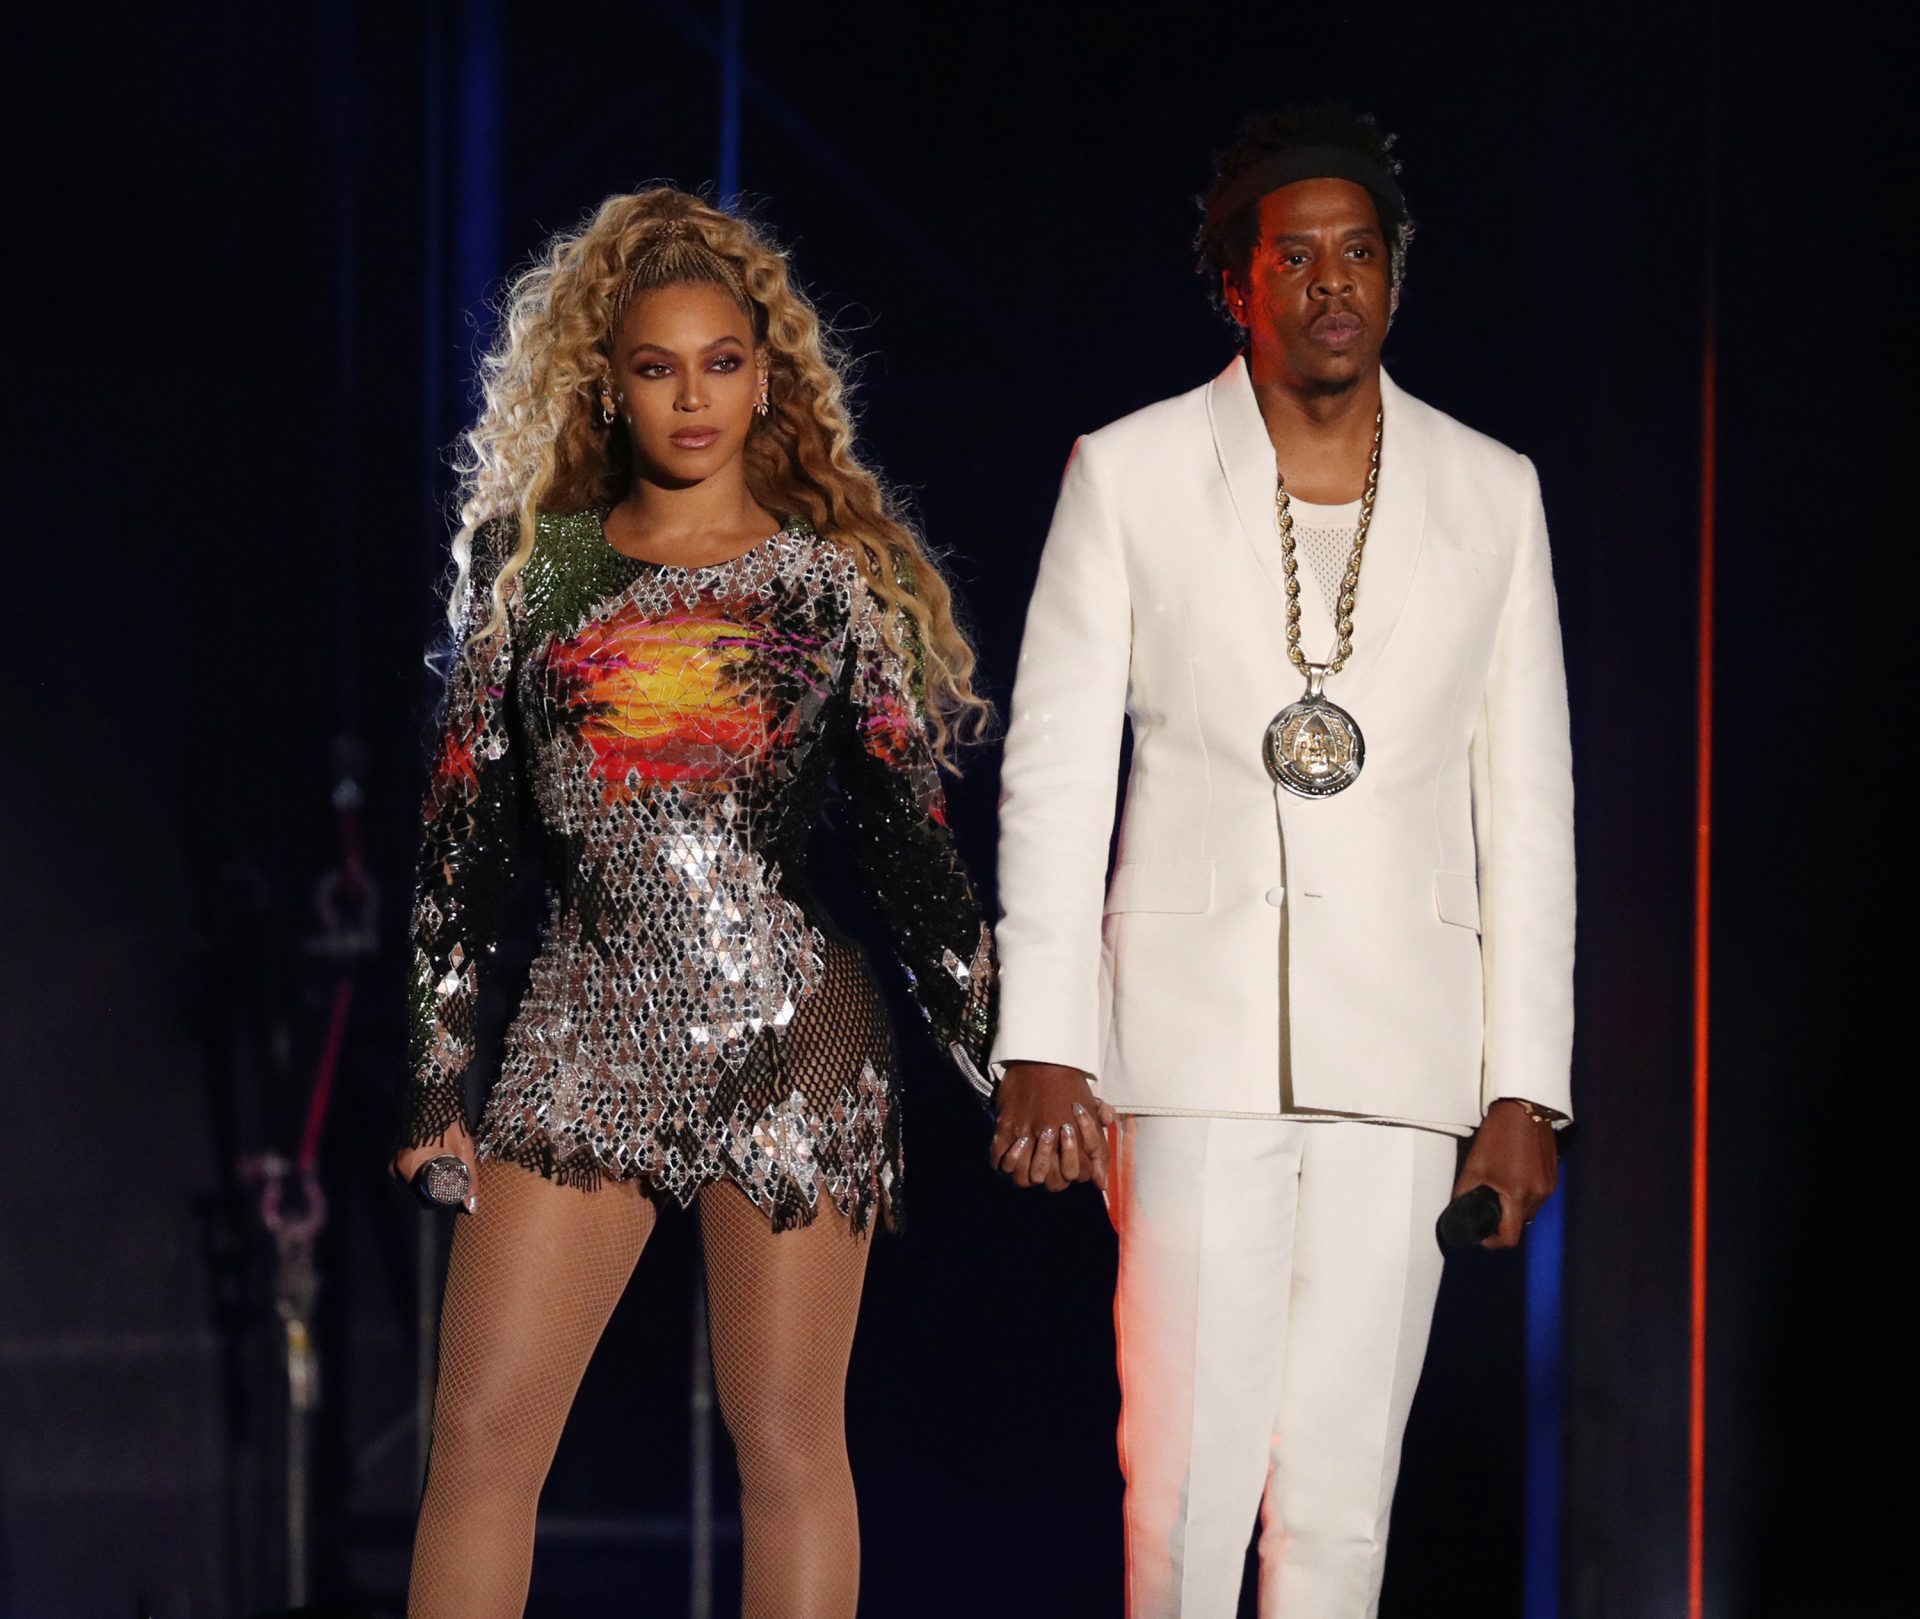 Beyoncé and Jay-Z take over Detroit with OTR II